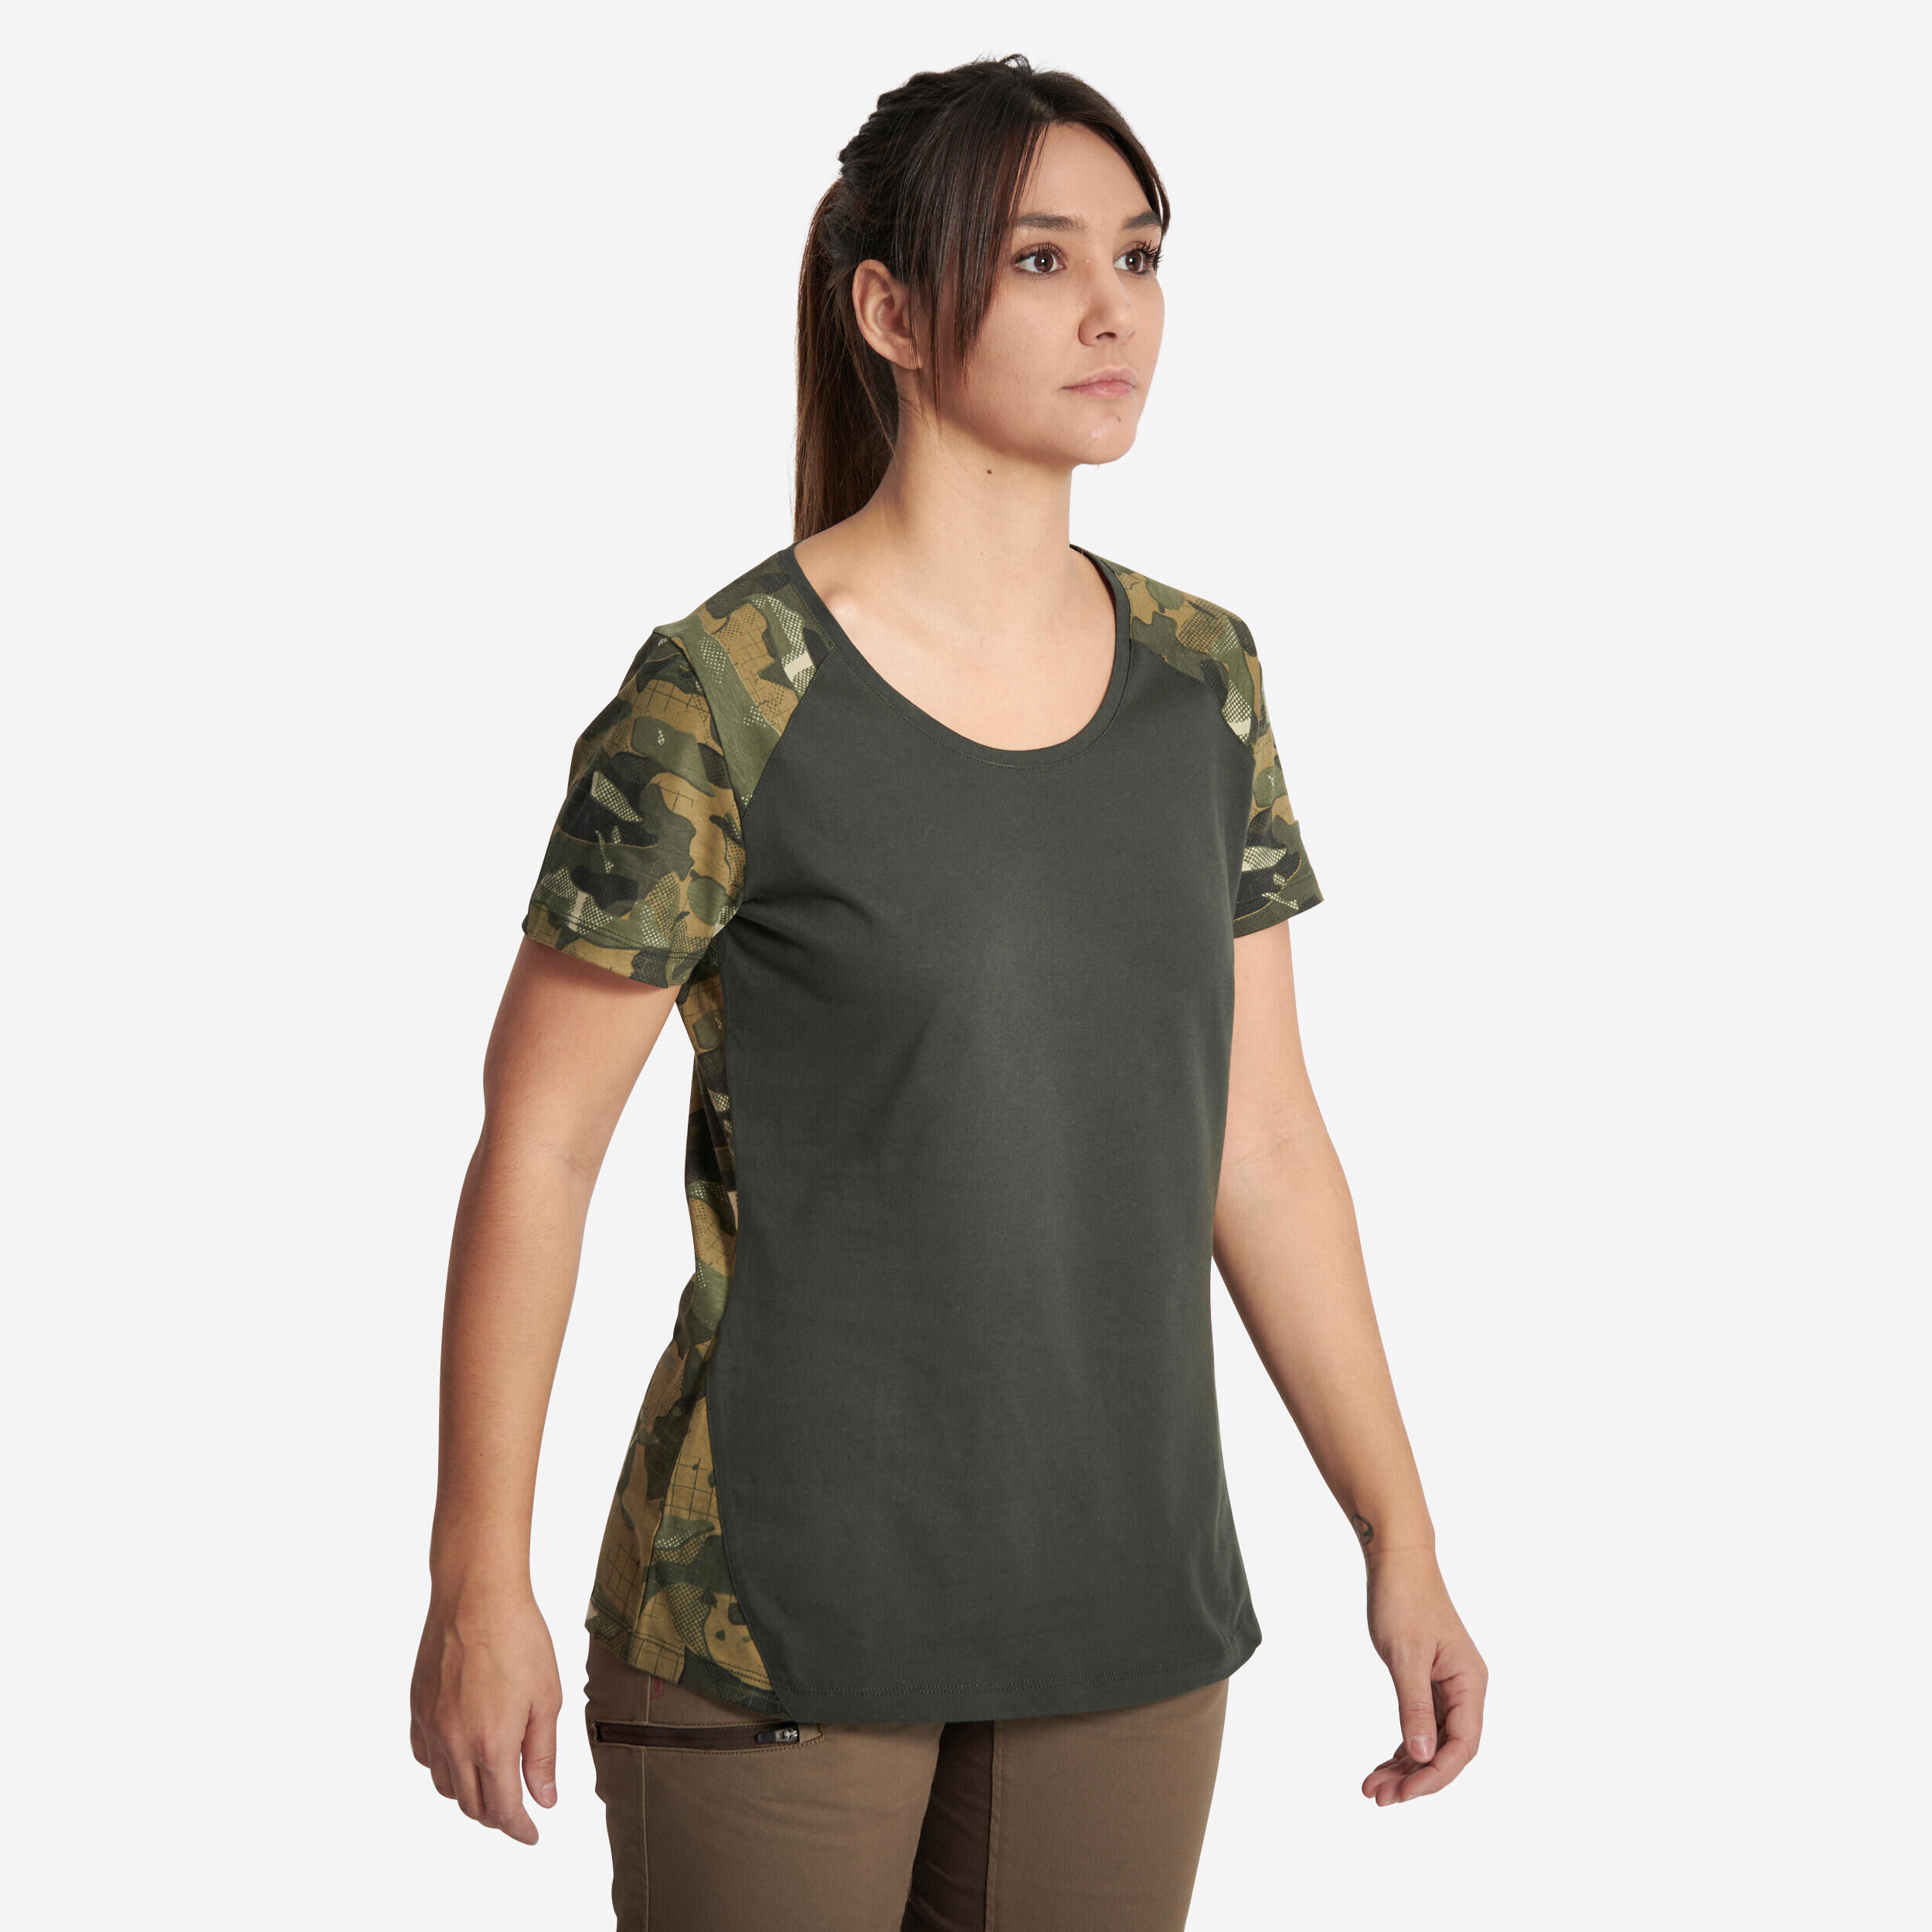 SOLOGNAC WOMEN'S SHORT-SLEEVED HUNTING T-SHIRT 300 COTTON CAMOUFLAGE GREEN